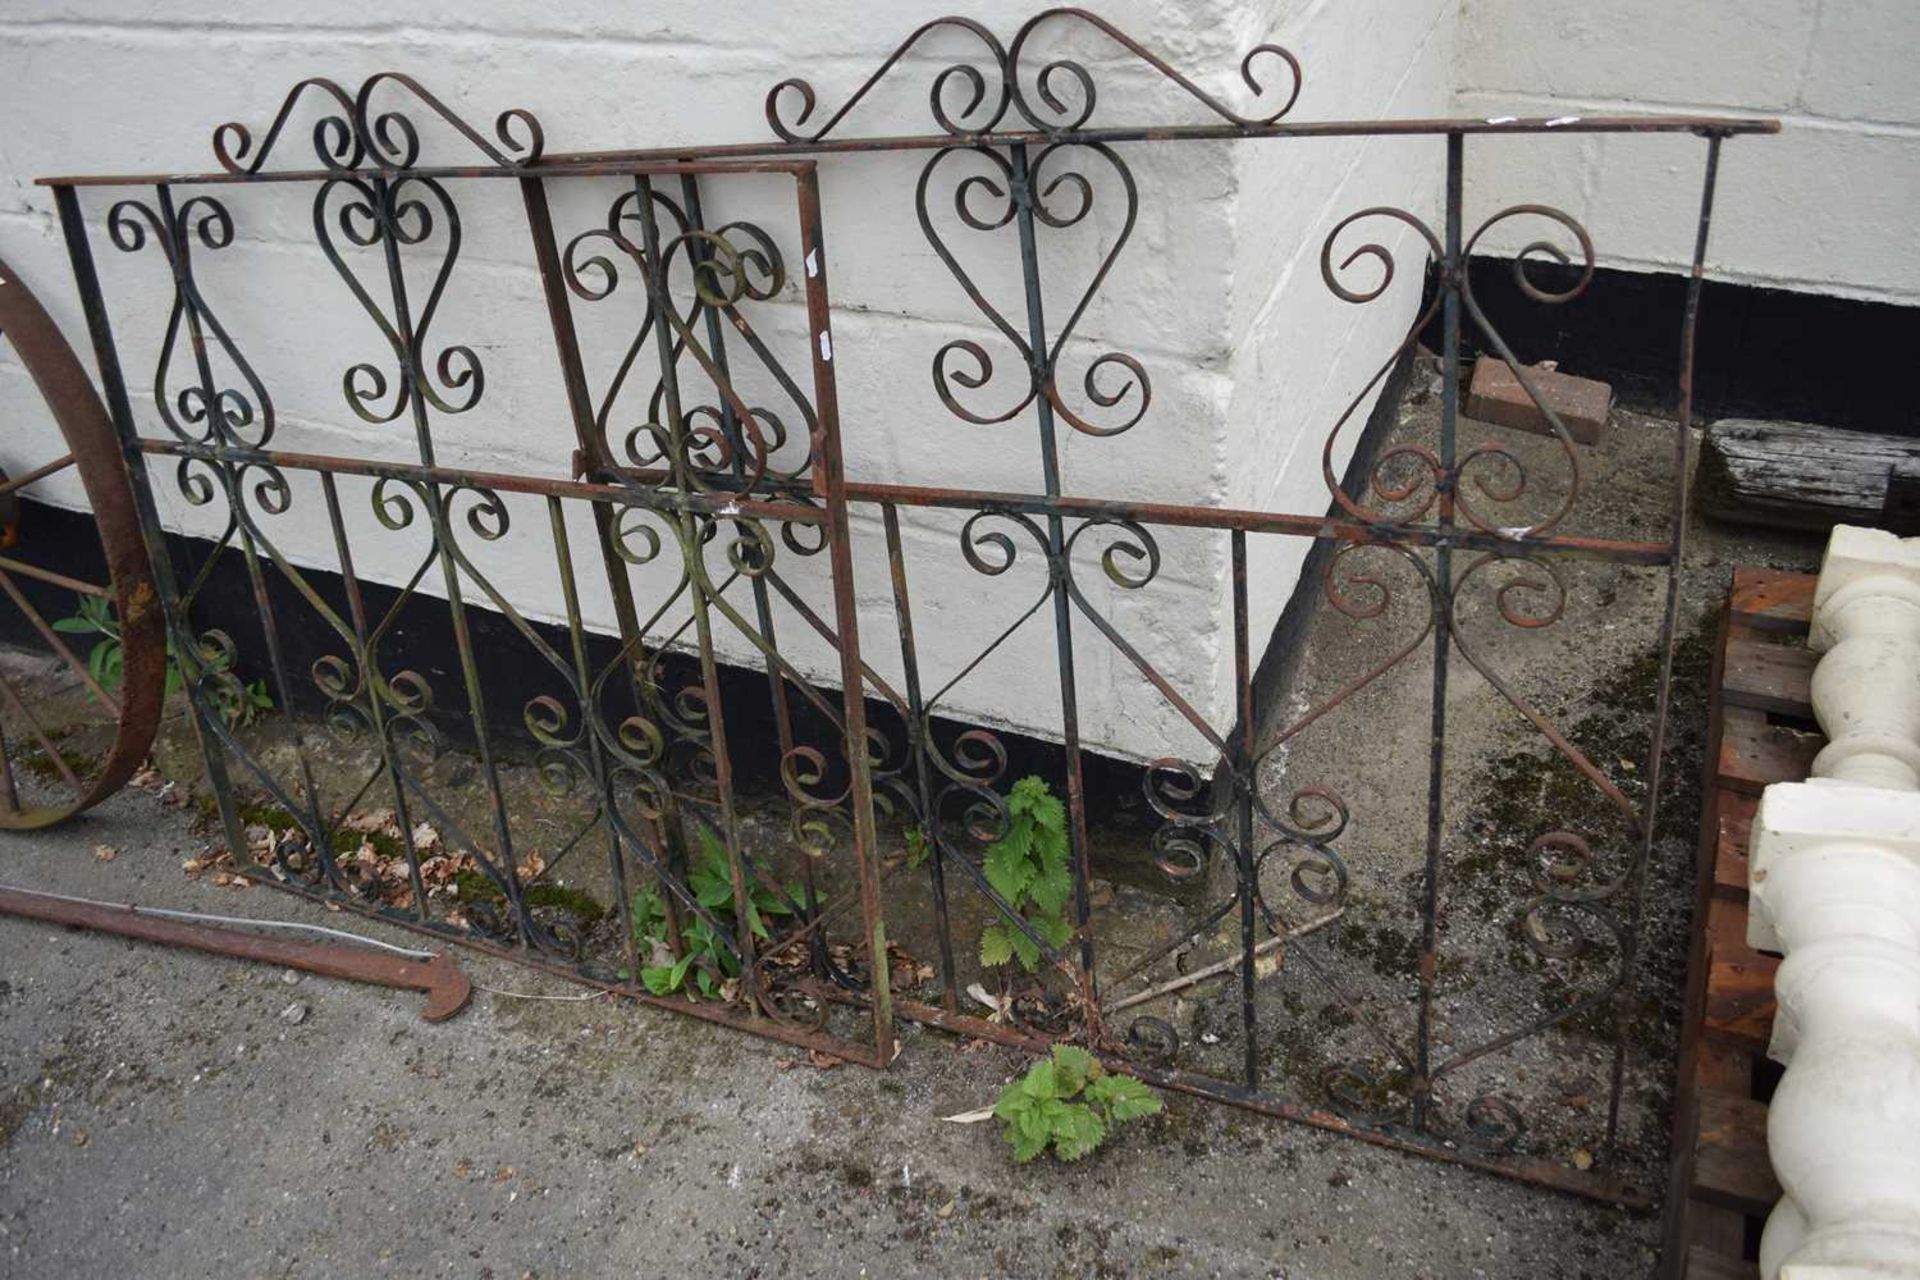 Set of decorative metal gates, individual gate width 150cm, total height approx 100cm - Image 2 of 2